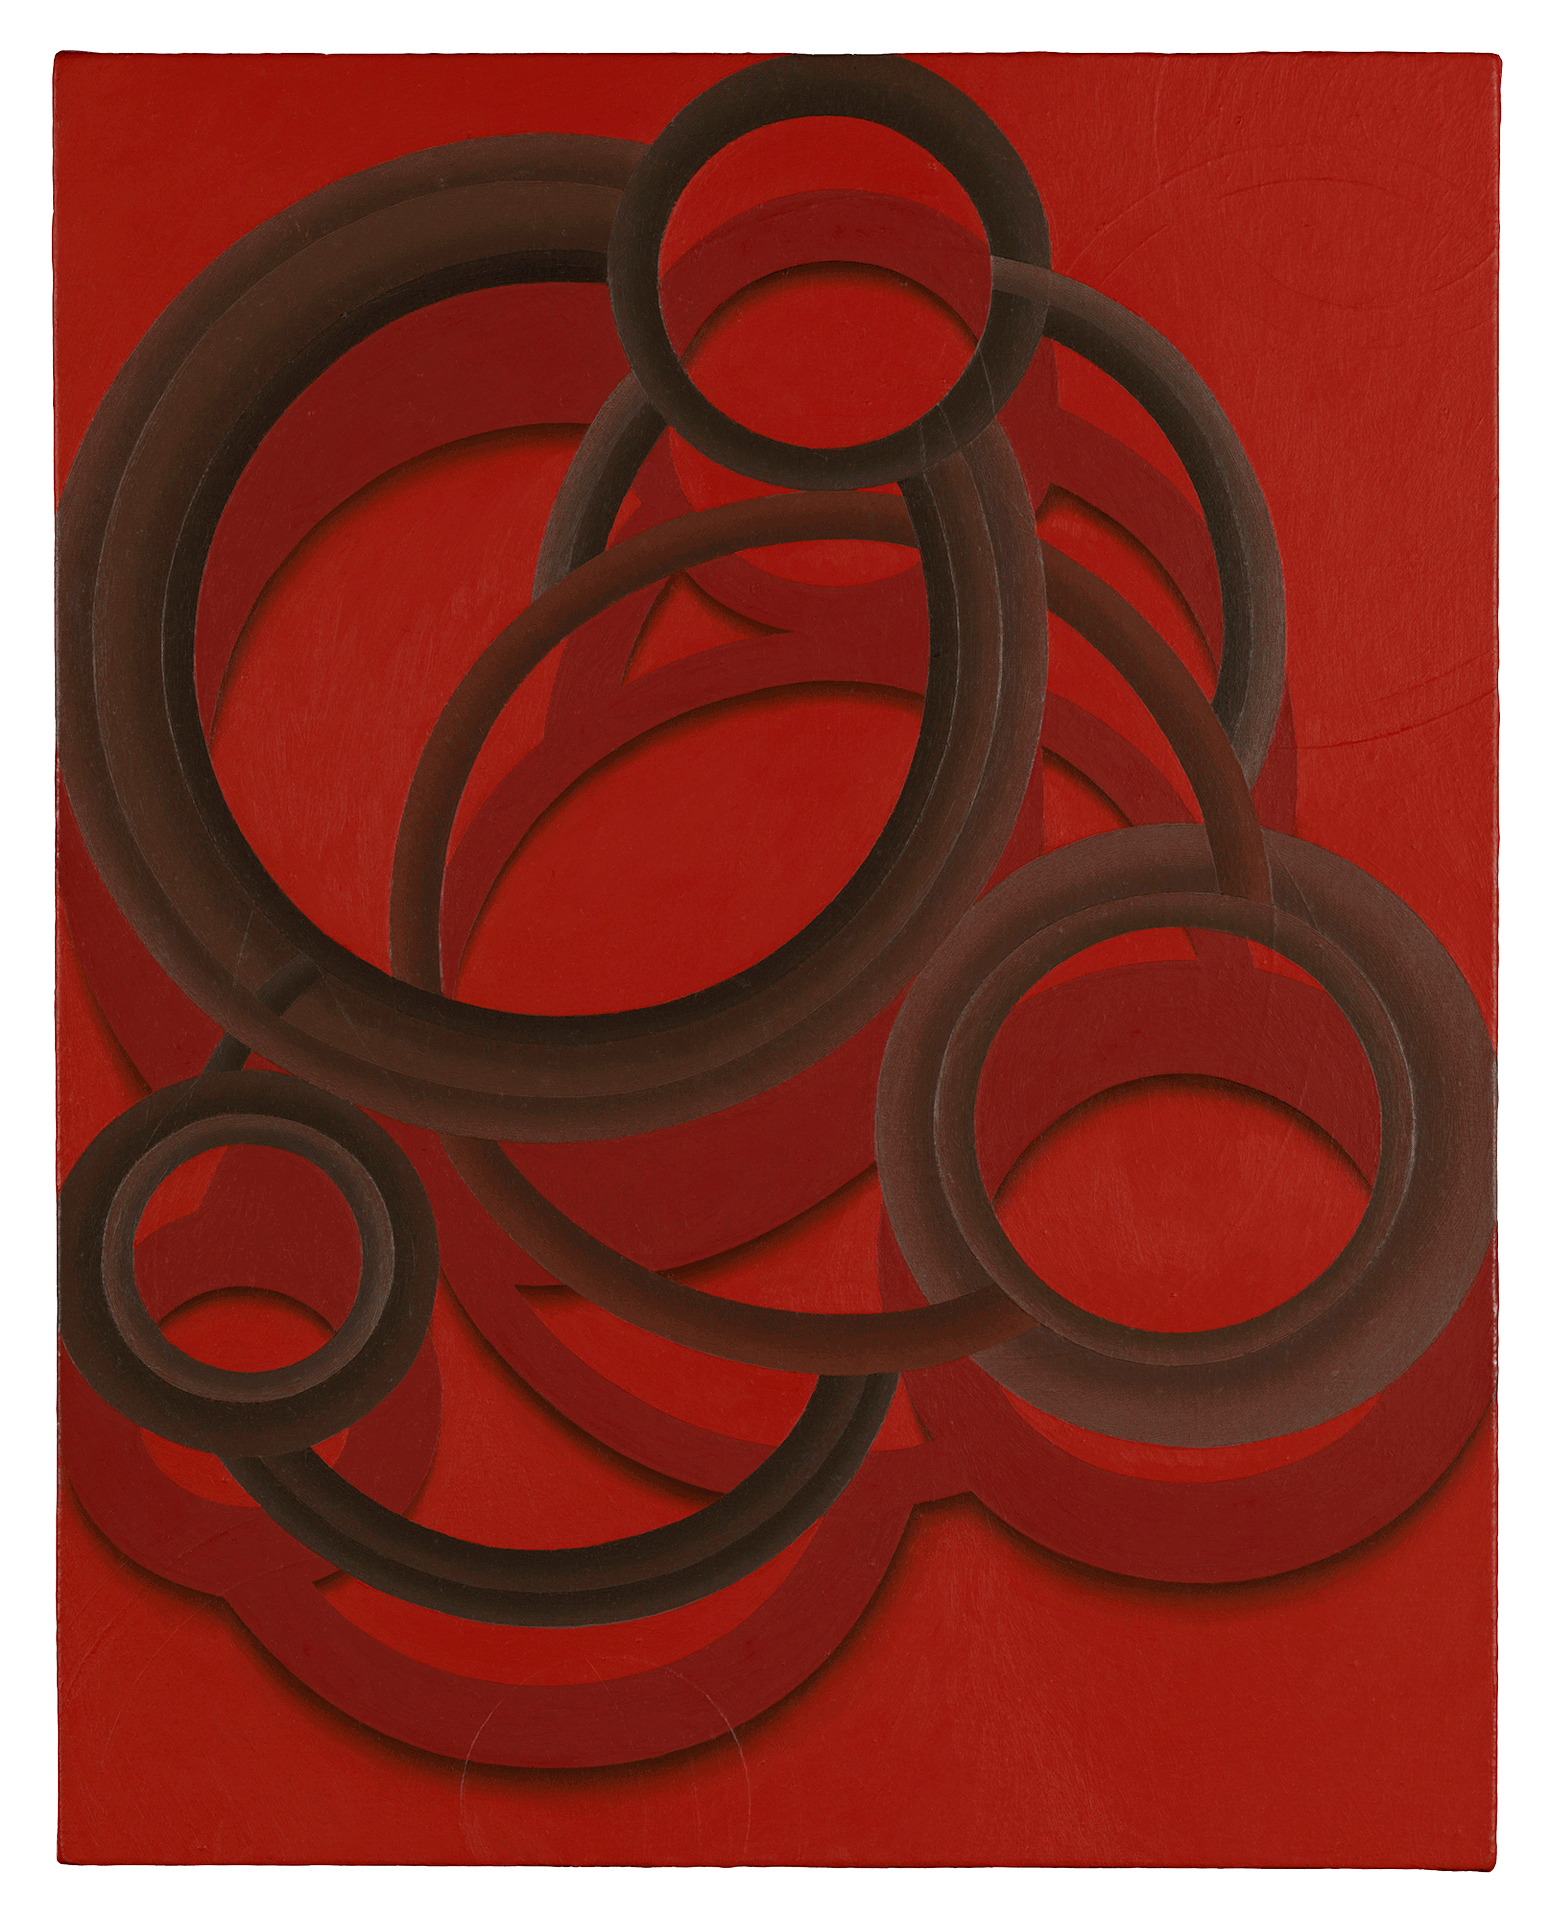 A painting by Tomma Abts, titled Schwero, dated 2005.